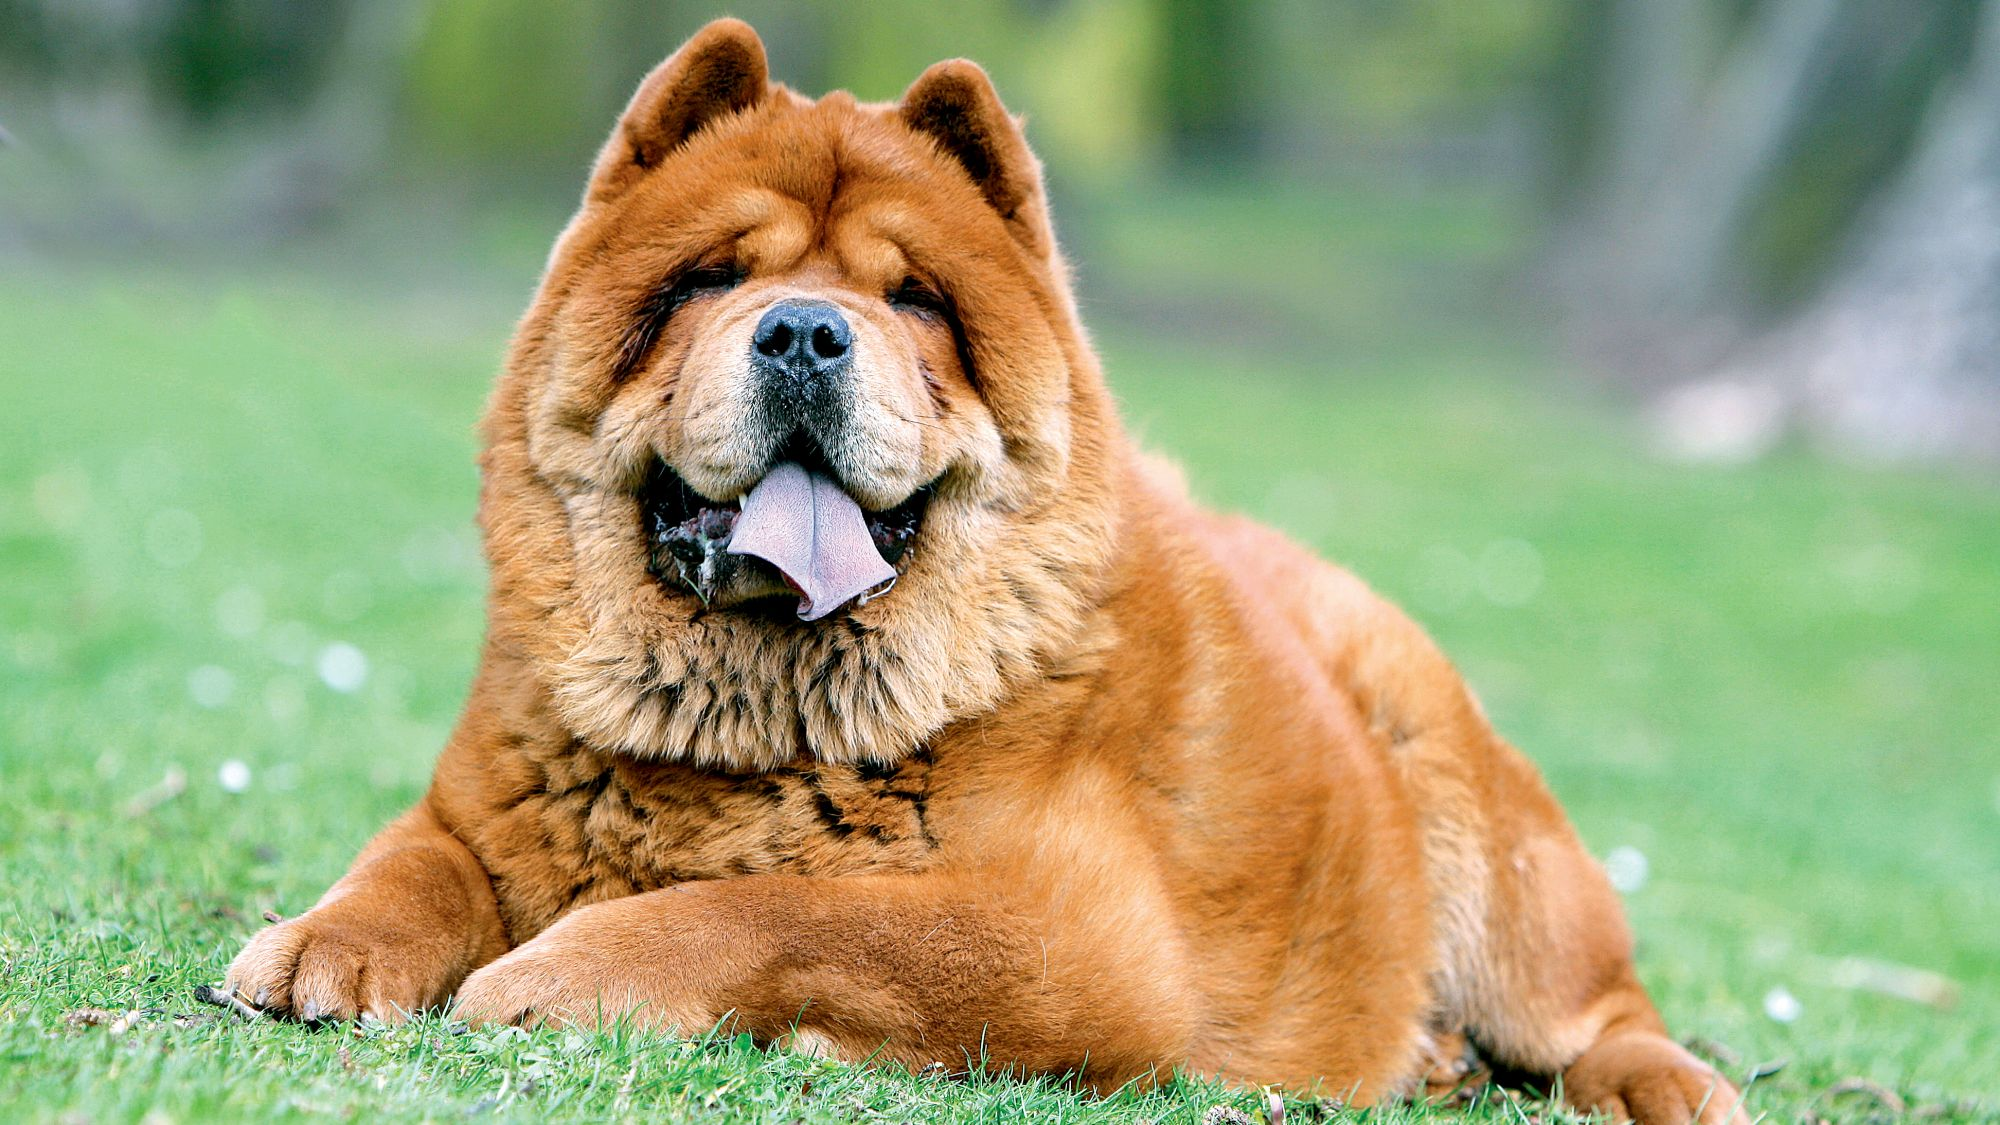 Tan Chow Chow laying on the grass